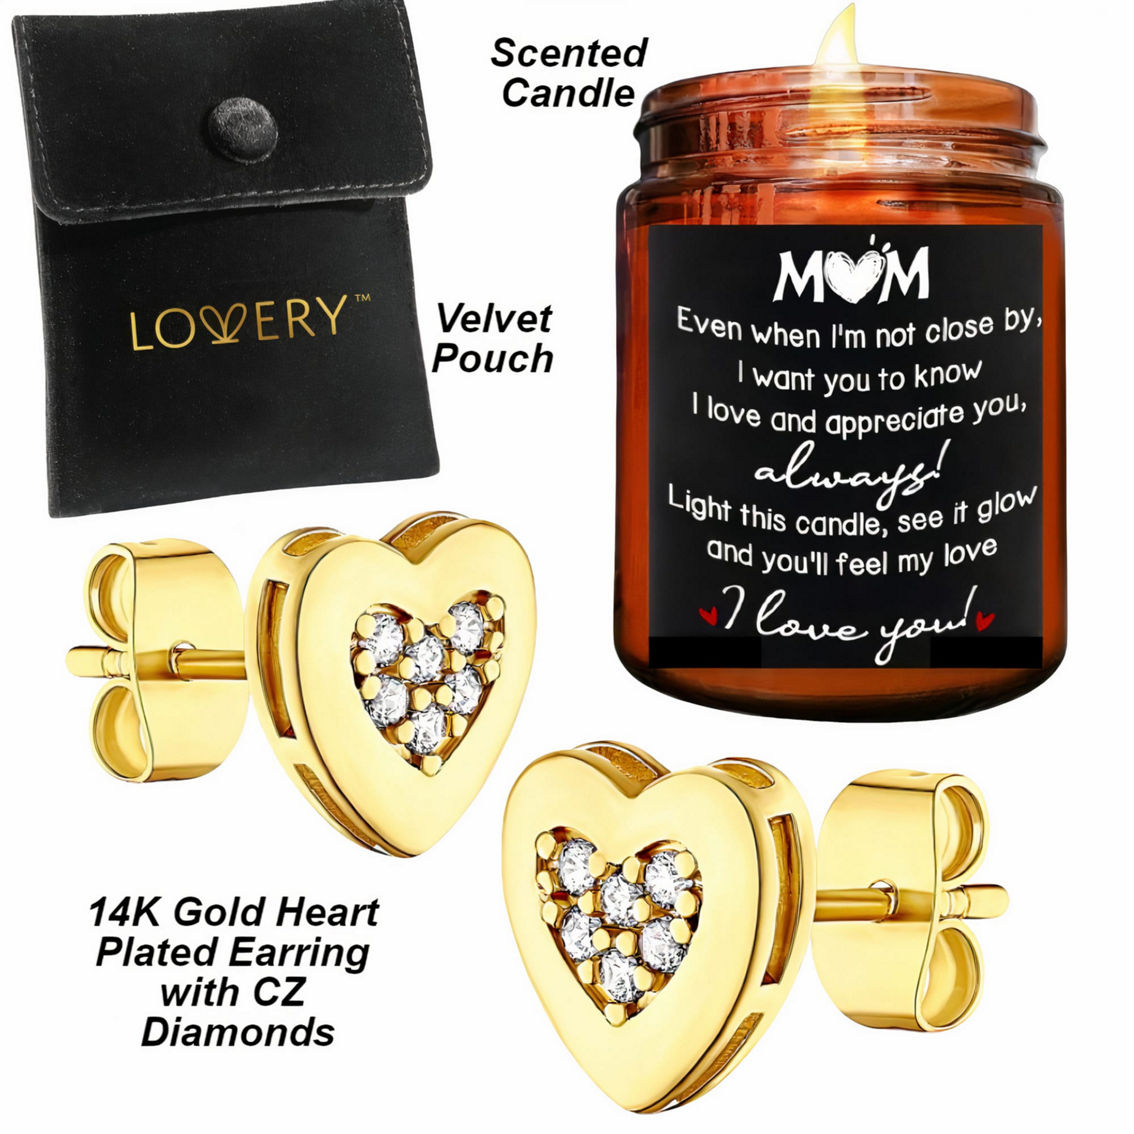 Lovery Mothers Day 14K Gold Plated Heart Earring with Pouch & MOM love Candle - Image 3 of 5